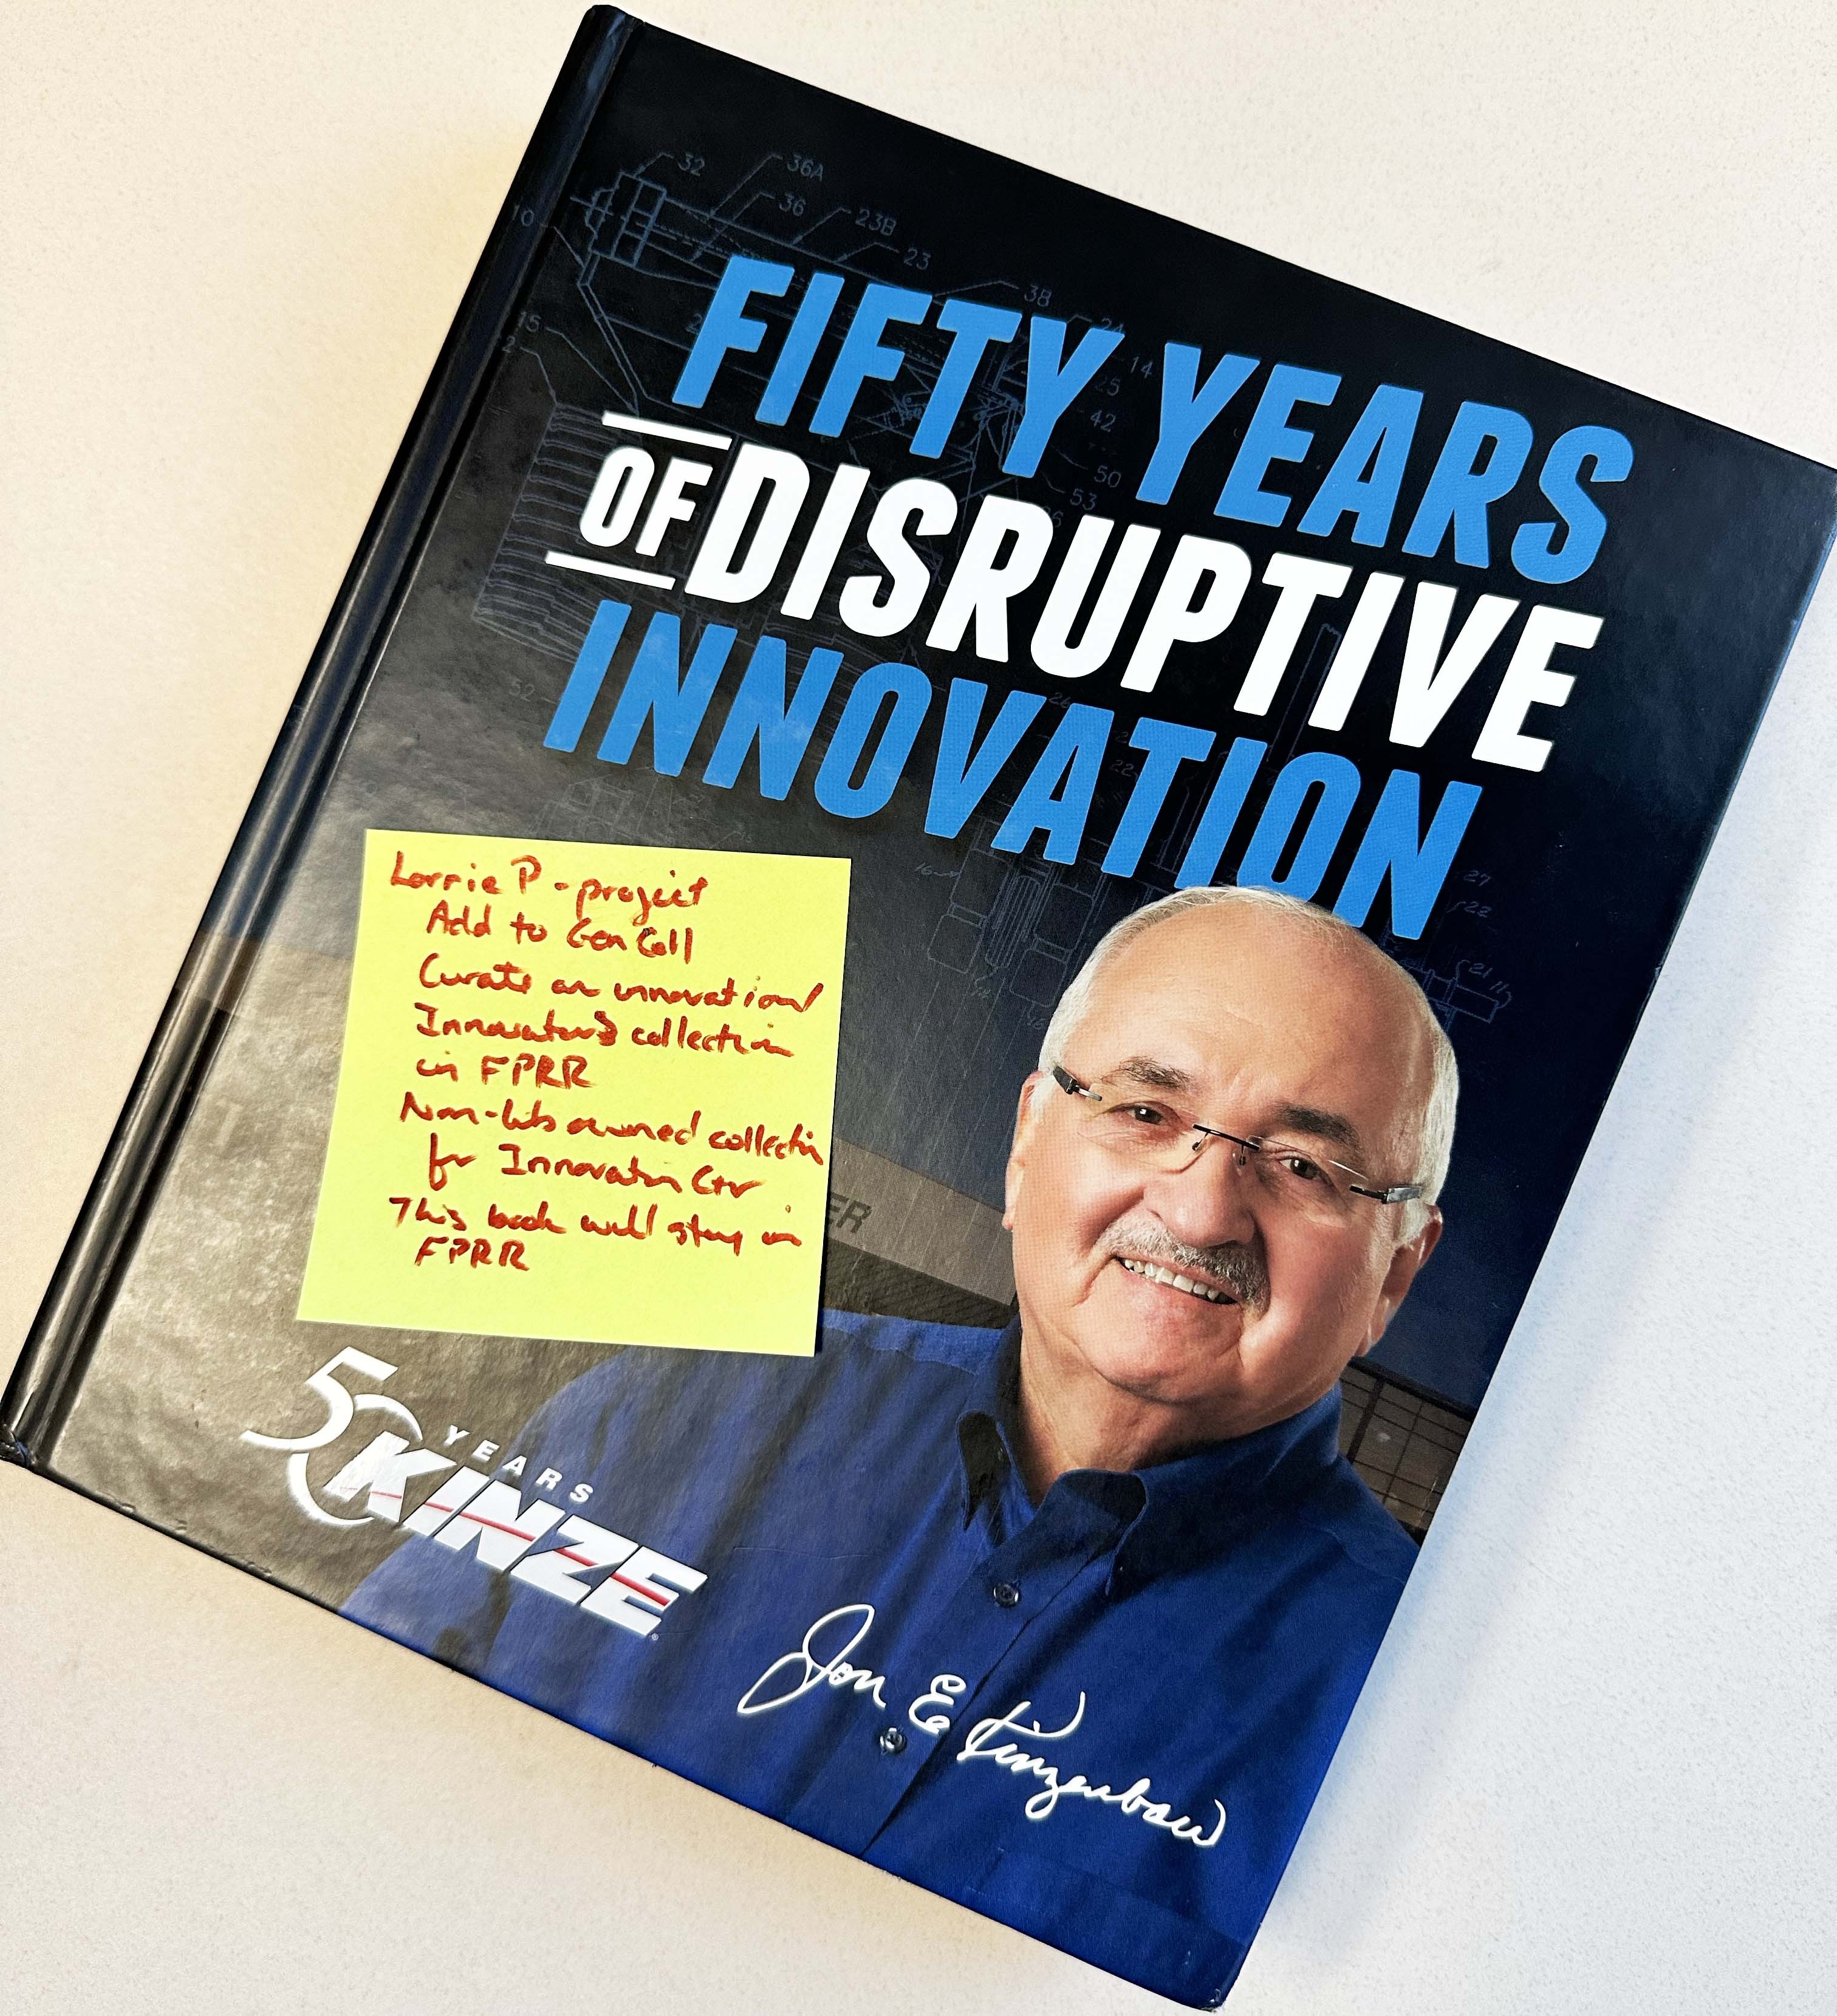 50 Years of Disruptive Innovation by Kinze Manufacturing